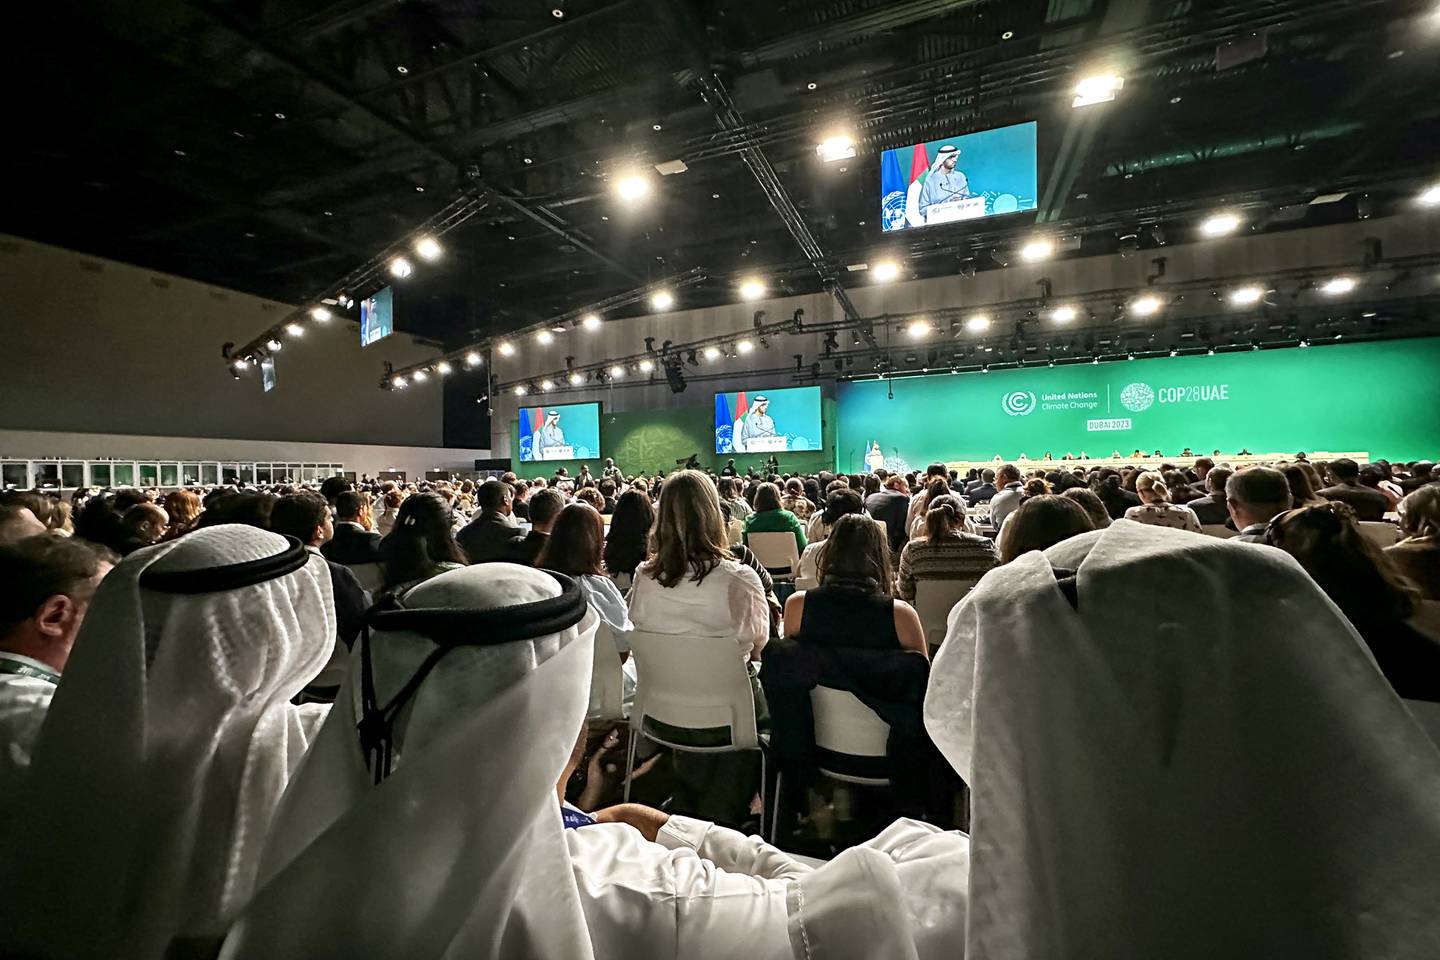 Participants attend a COP28 a plenary session at the United Nations climate summit in Dubai on December 13, 2023. Nations adopted the first ever UN climate deal that calls for the world to transition away from fossil fuels. "We have the basis to make transformational change happen," COP28 president Sultan Al Jaber said at the UN climate summit in Dubai before the deal was adopted by consensus, prompting delegates to rise and applaud. (Photo by Giuseppe CACACE / AFP)